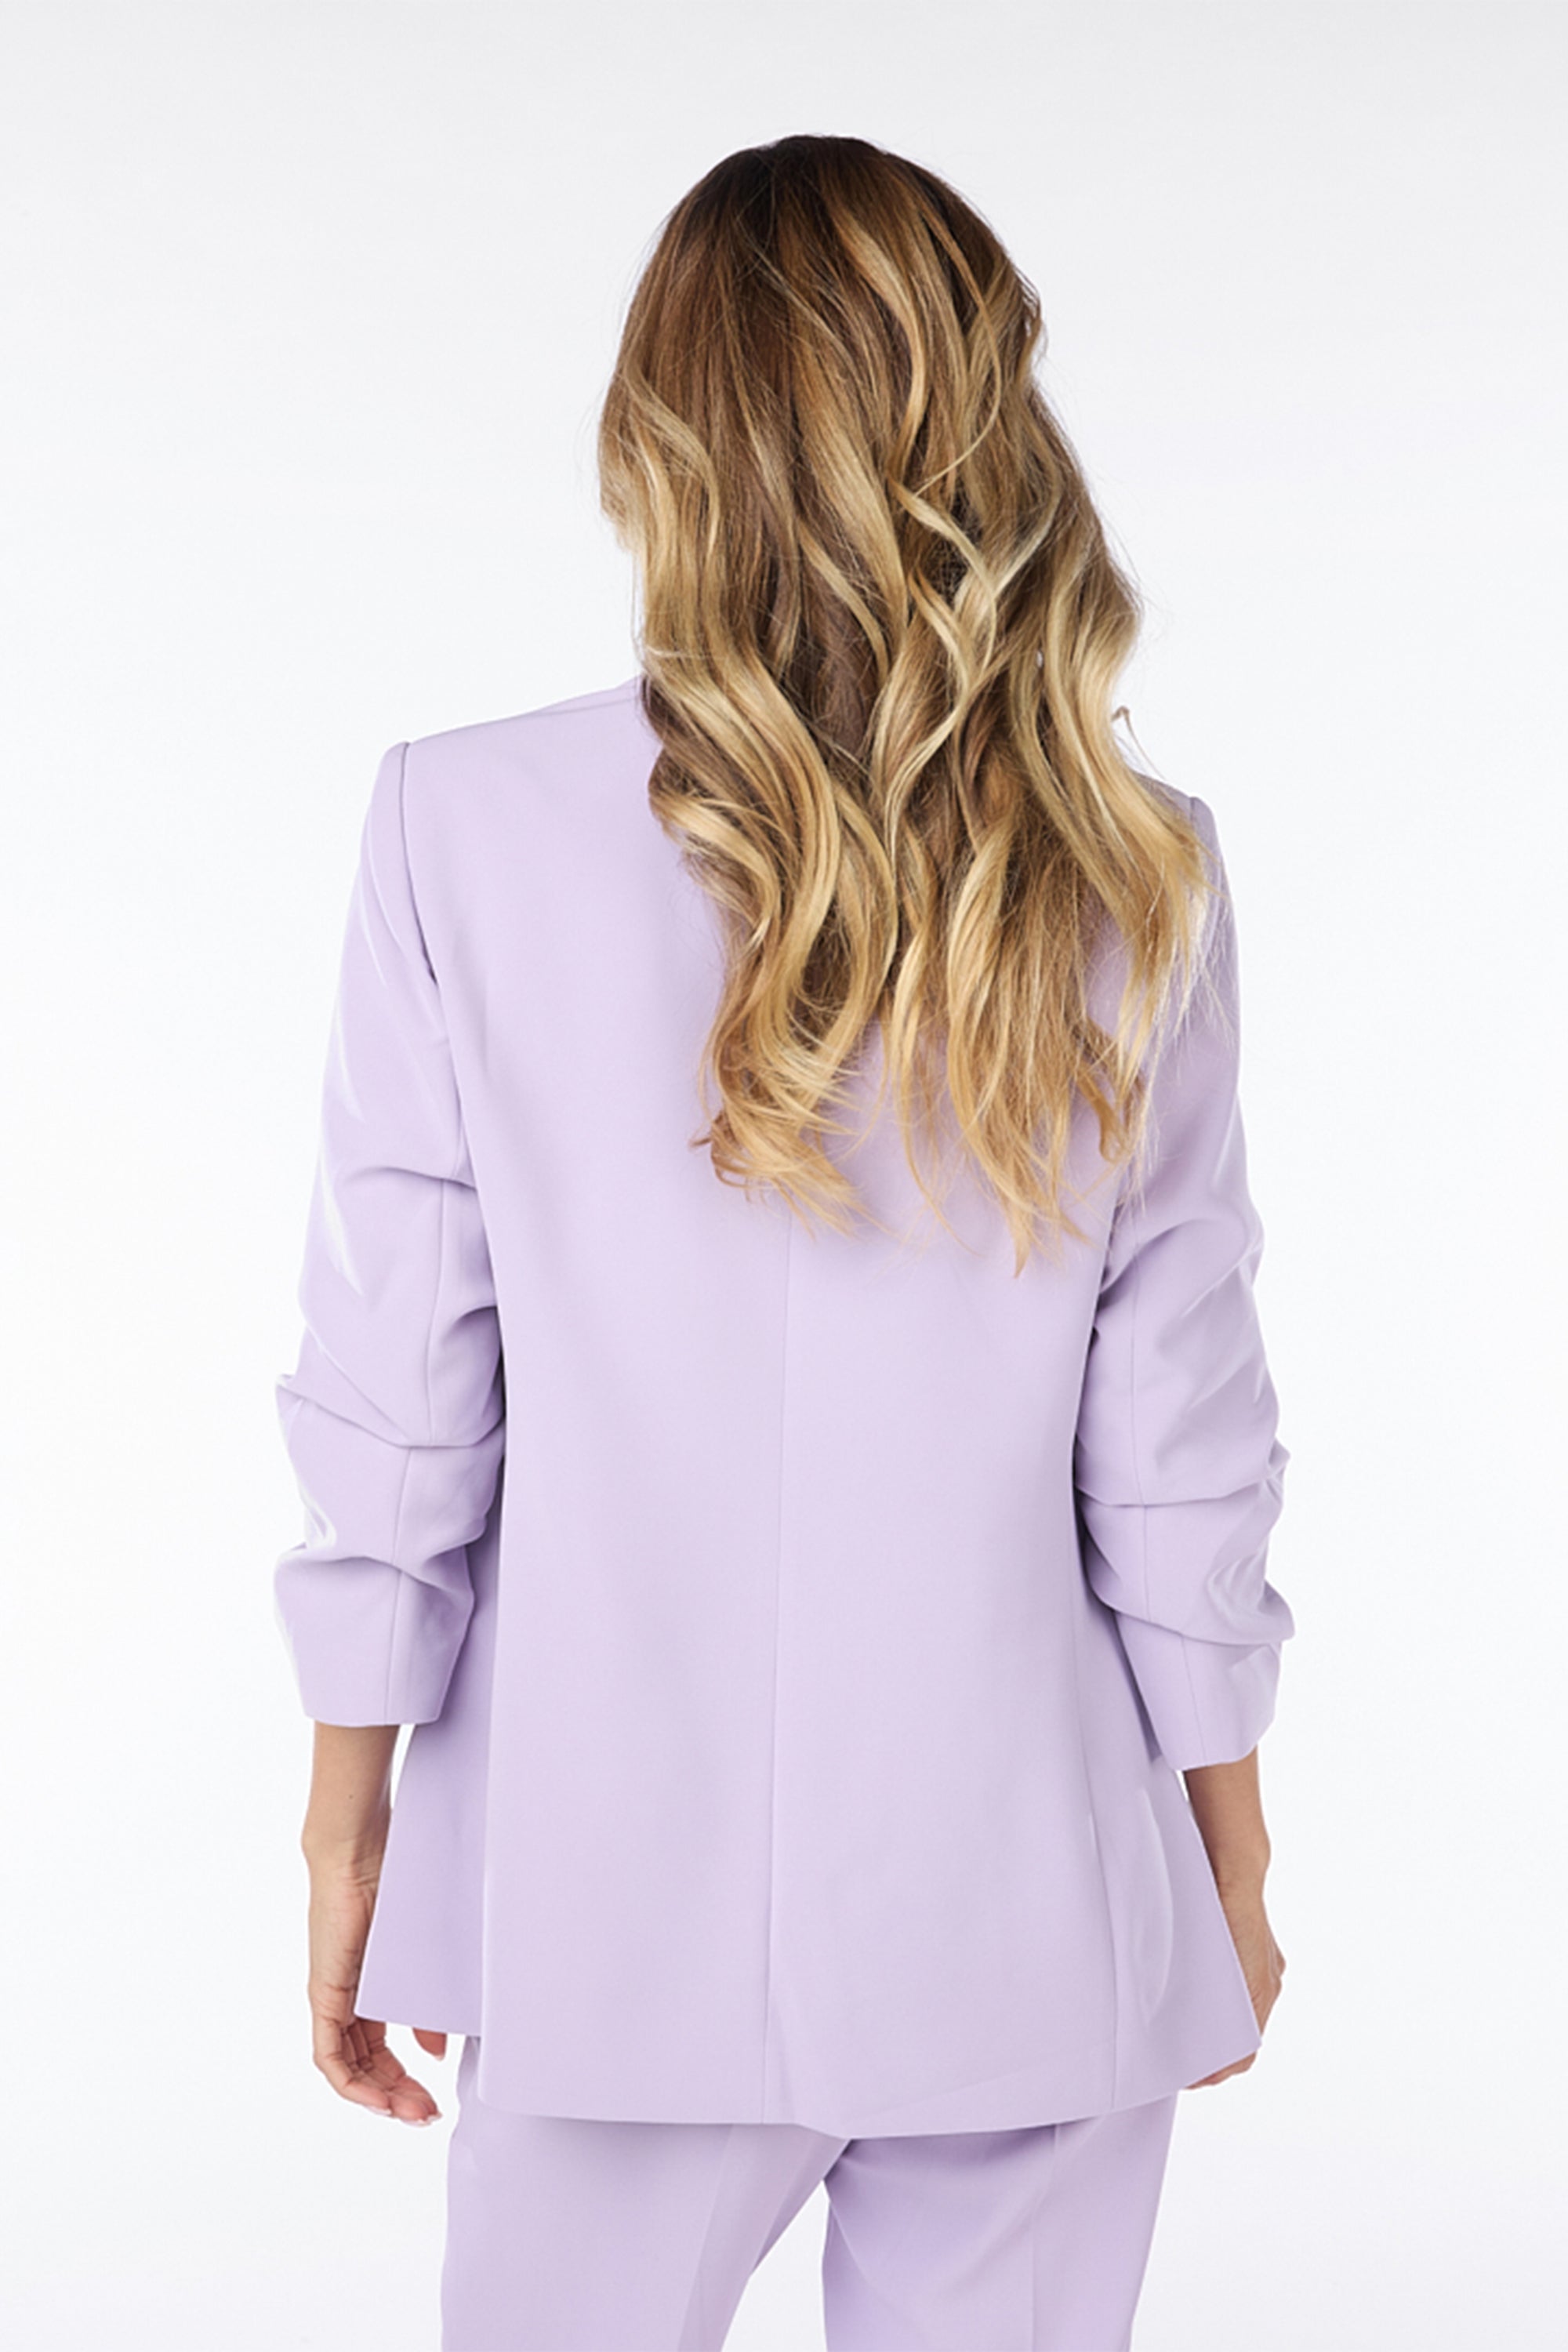 Back view of Esqulao (SP2410023) Women's Ruched 3/4 Sleeve Open Front Blazer with Flap Pockets in Lilac Purple